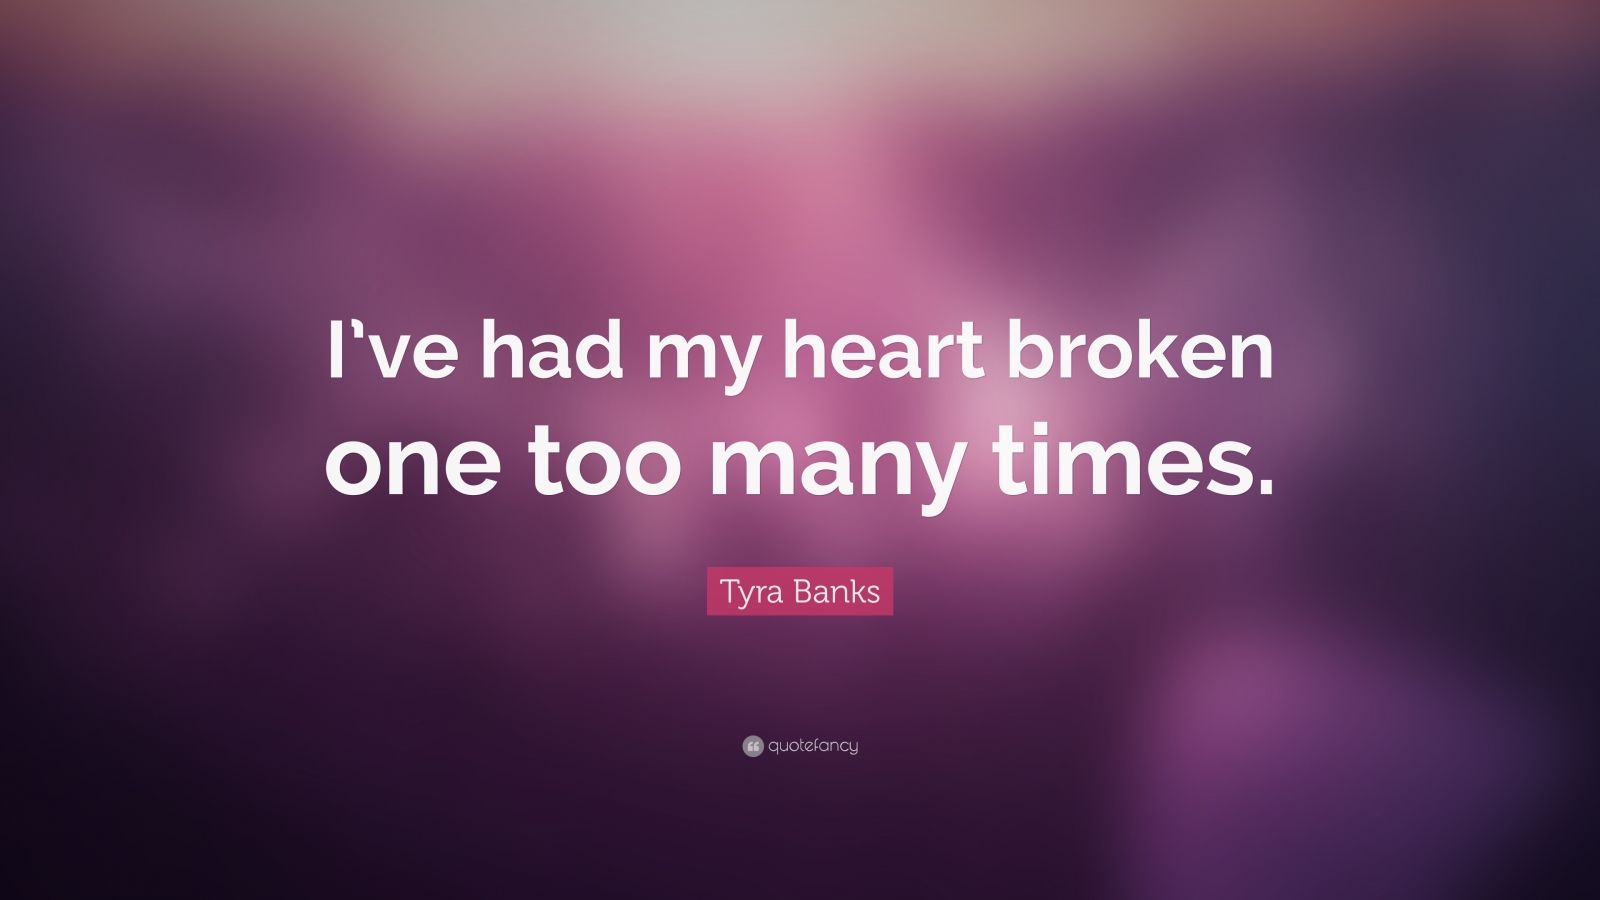 Tyra Banks Quote: “I’ve had my heart broken one too many times.” (7 ...